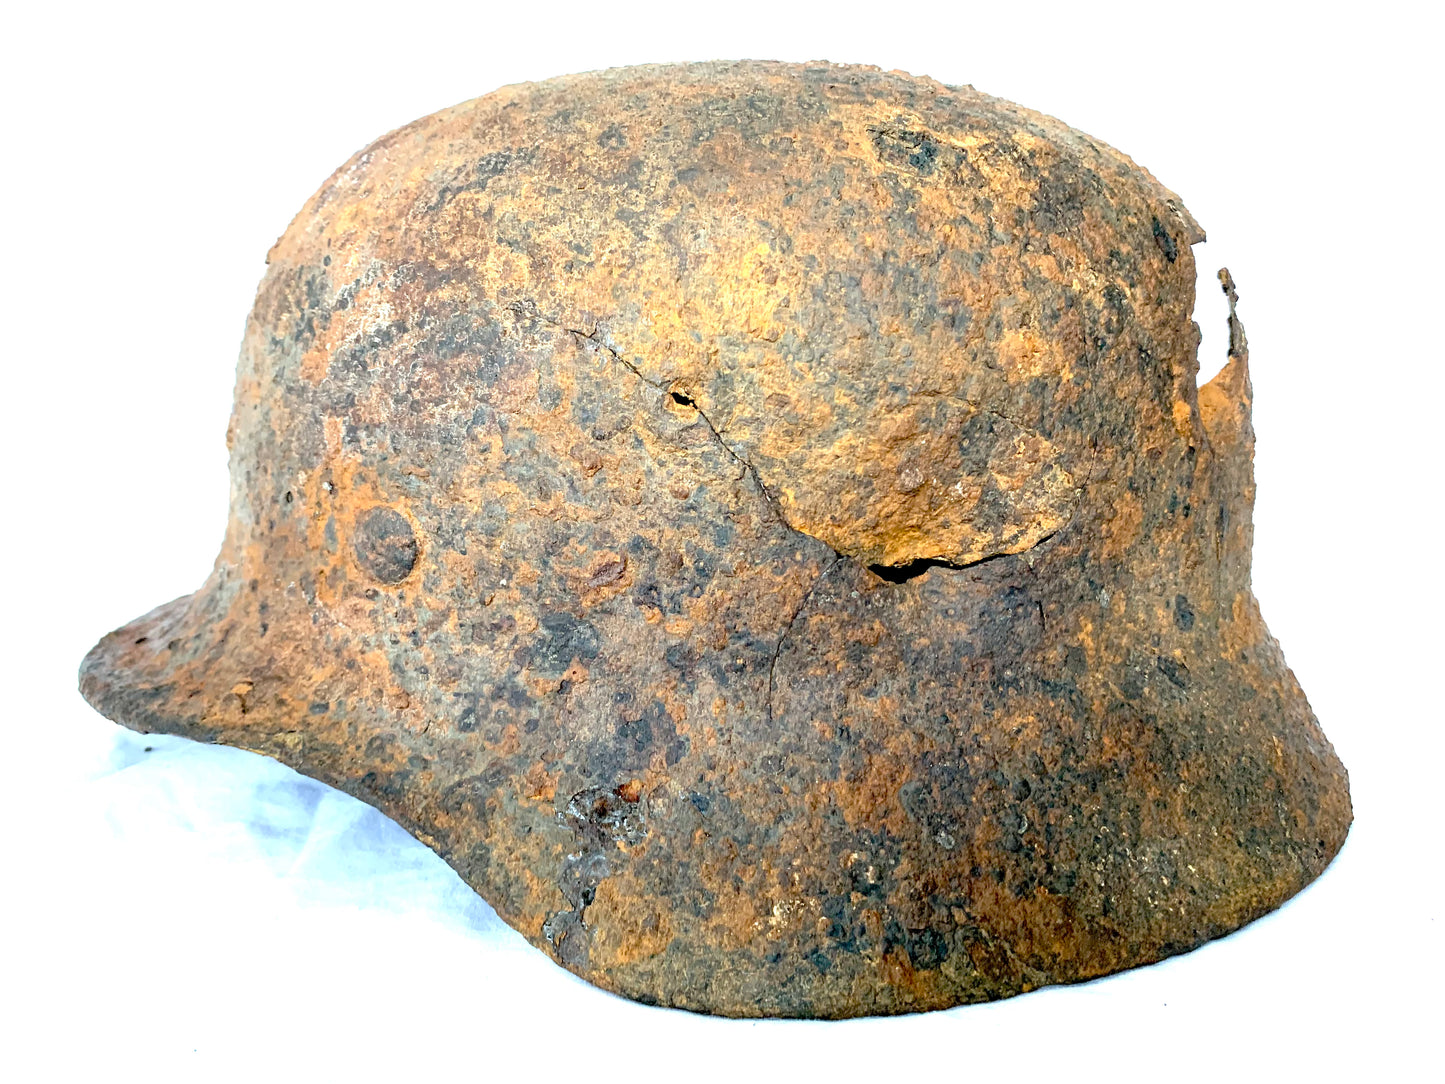 WW2 German M40 Battle Damaged Helmet recovered from the Eastern Front.